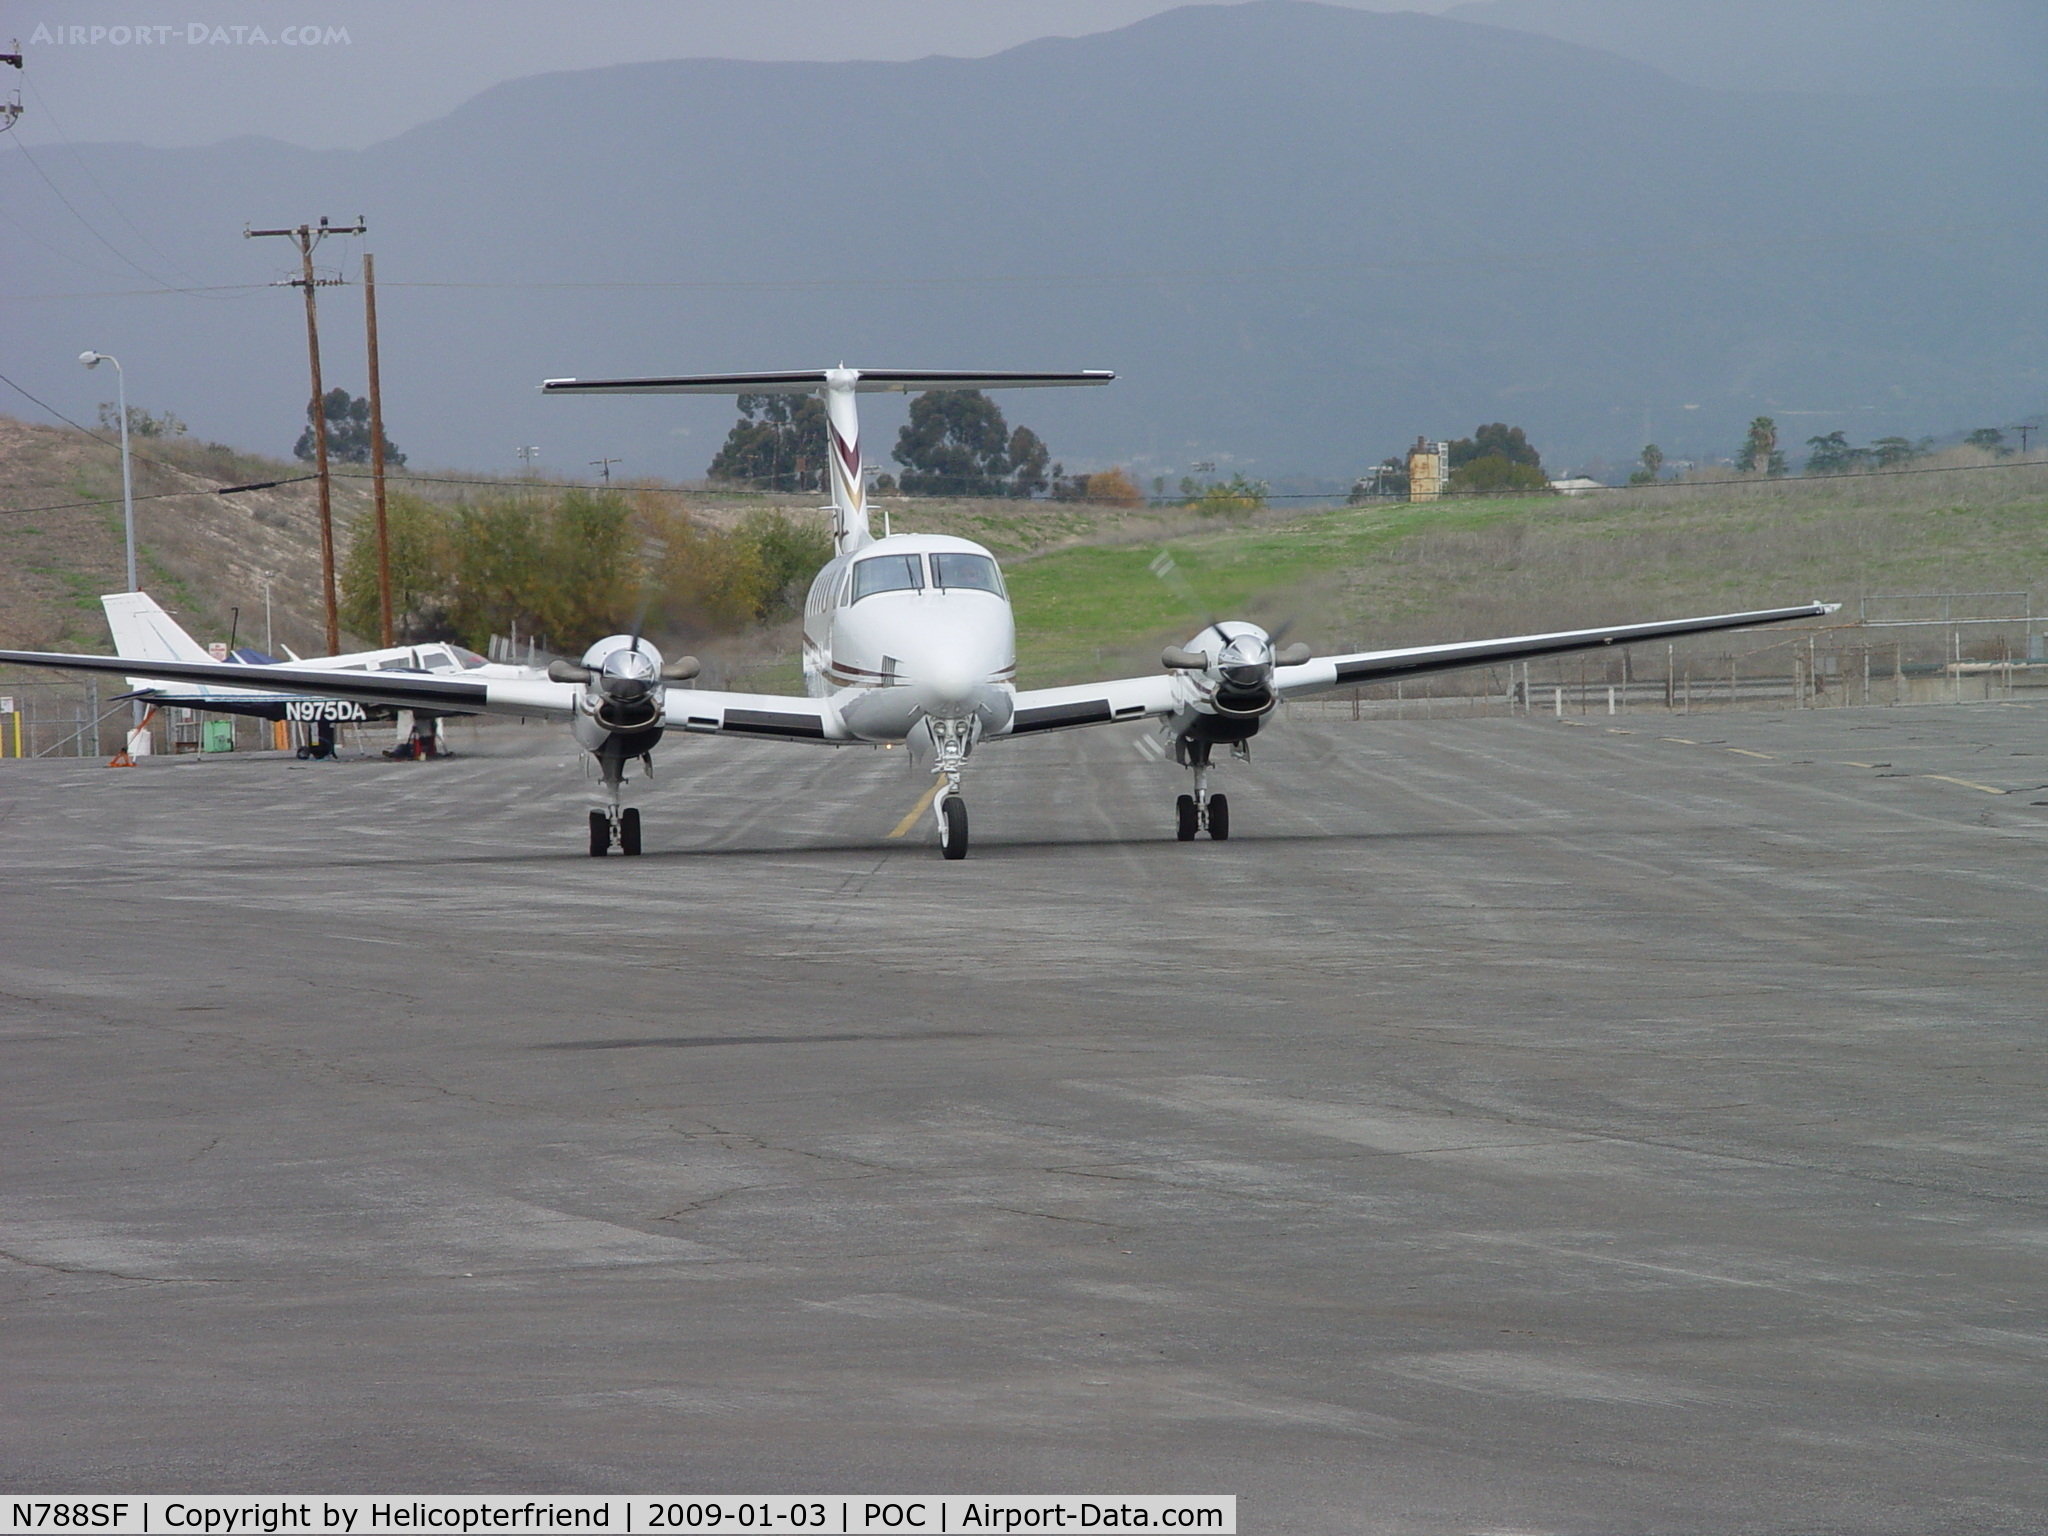 N788SF, Raytheon Aircraft Company B200 C/N BB-1857, Leaving parking area heading to taxiway